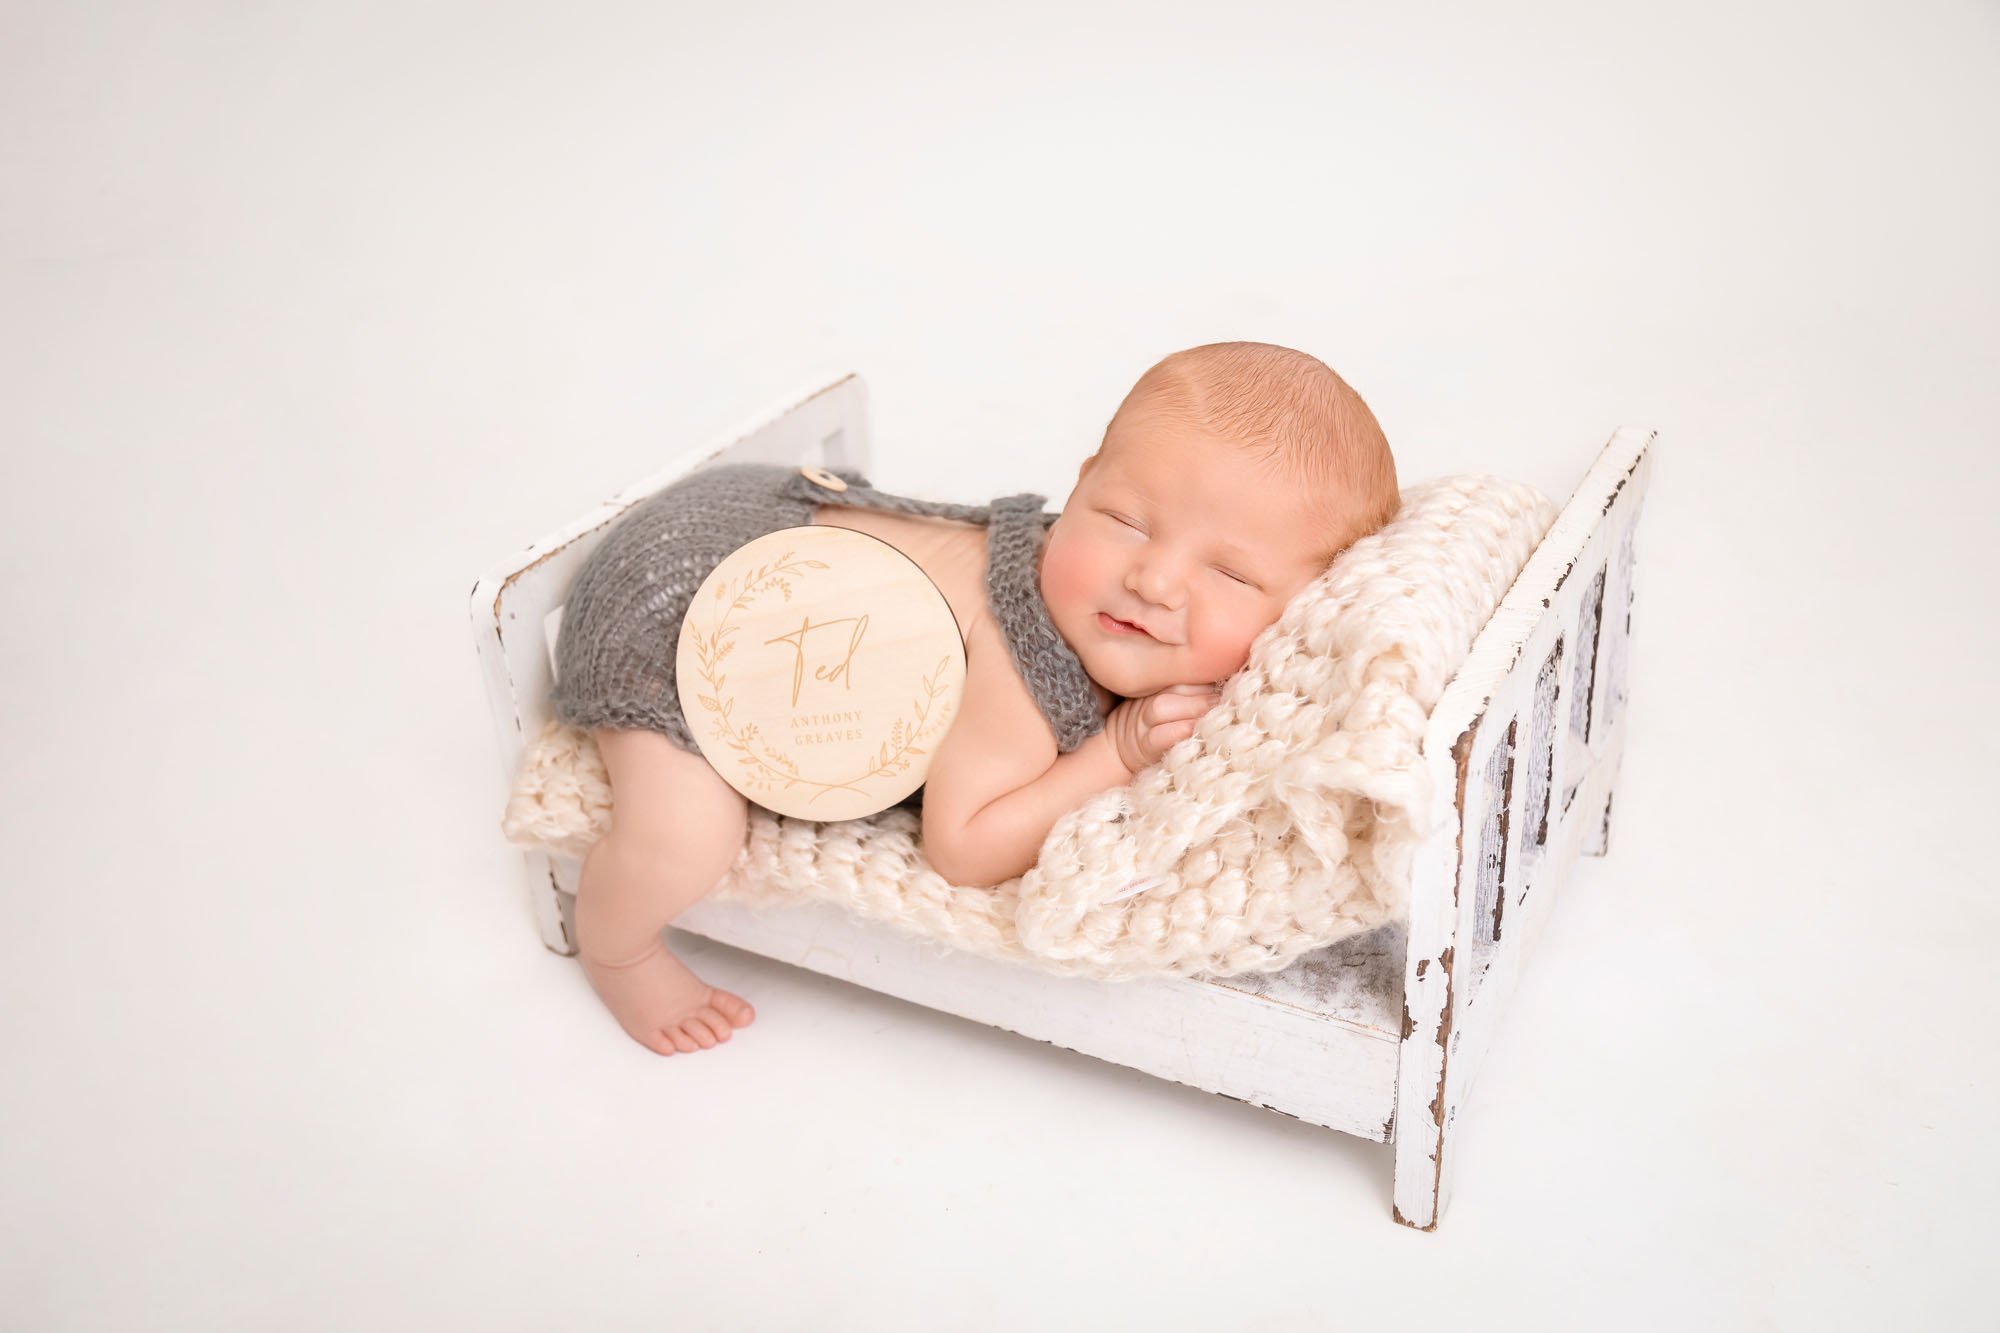 newborn-photography-in-leeds-baby-boy-on-white-bed-name tag.jpg